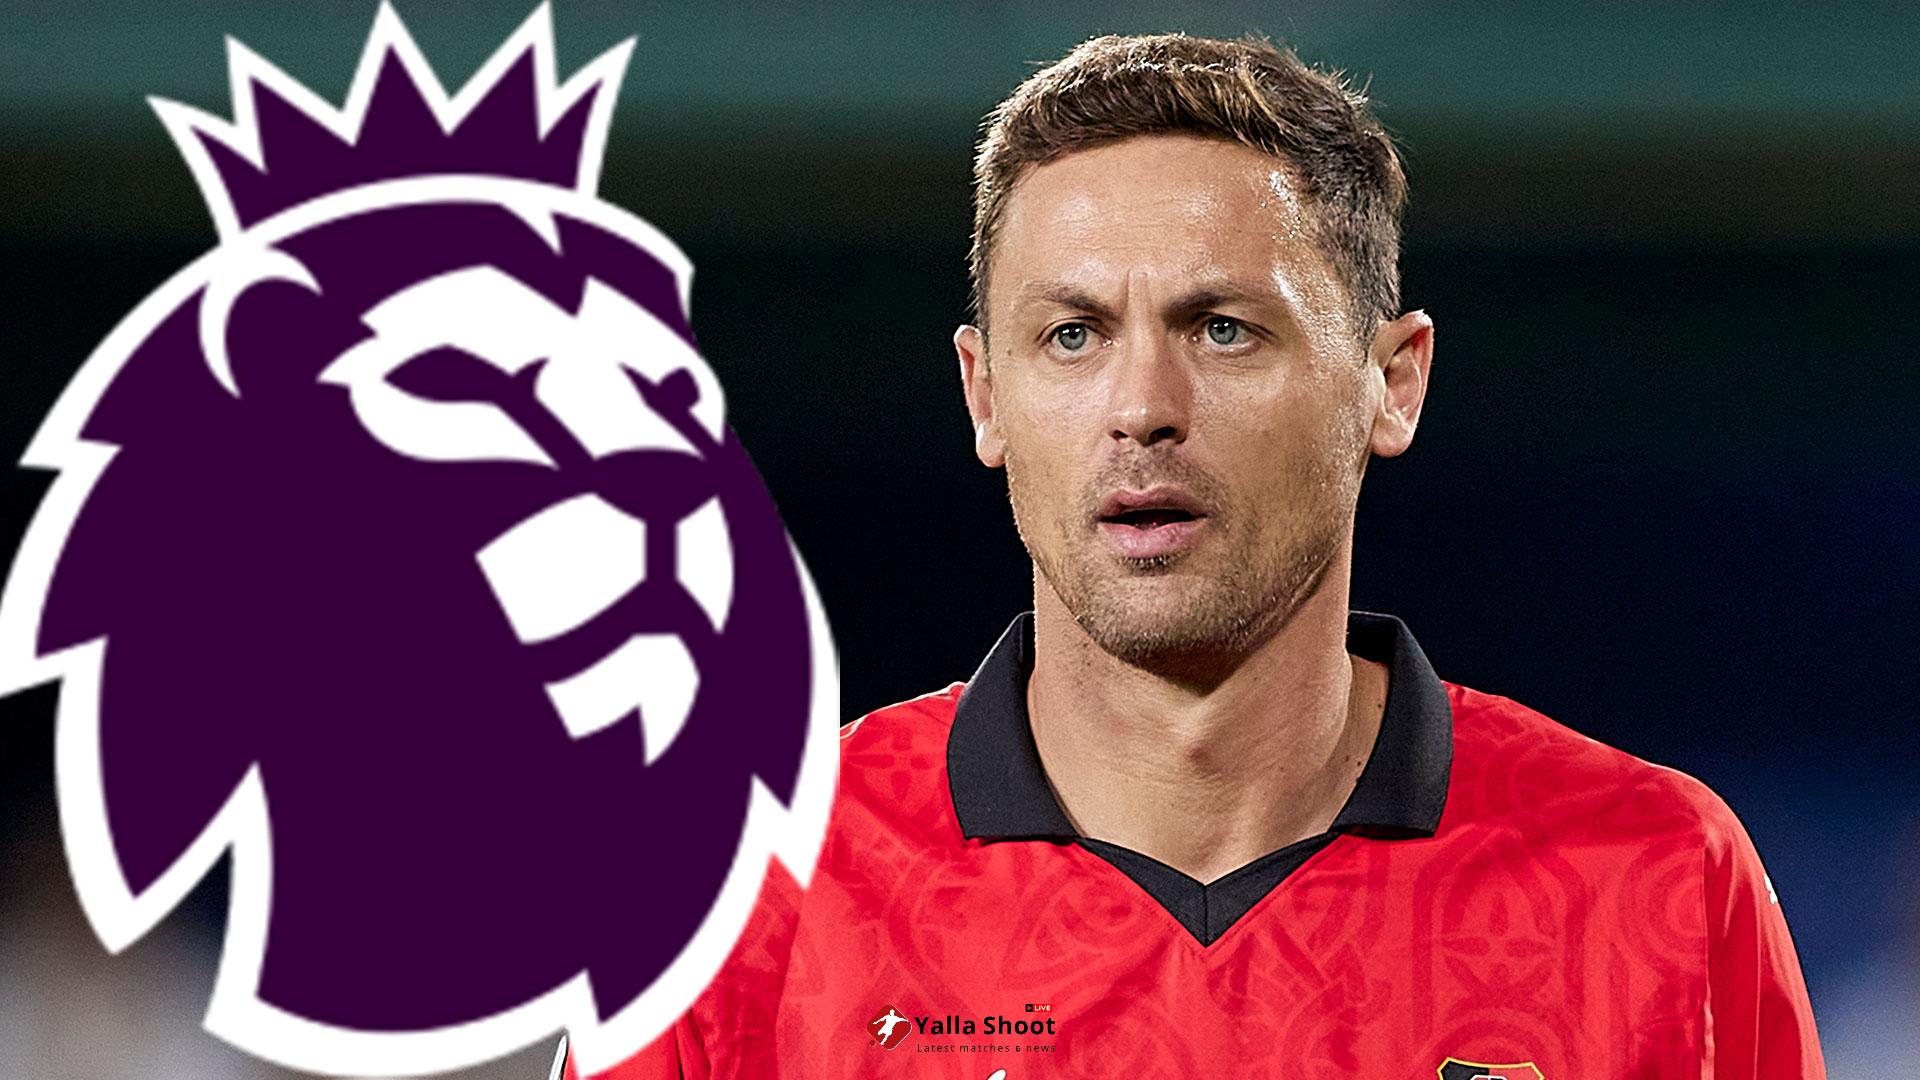 Nemanja Matic lined up for shock Premier League transfer return after spells with Chelsea and Man Utd